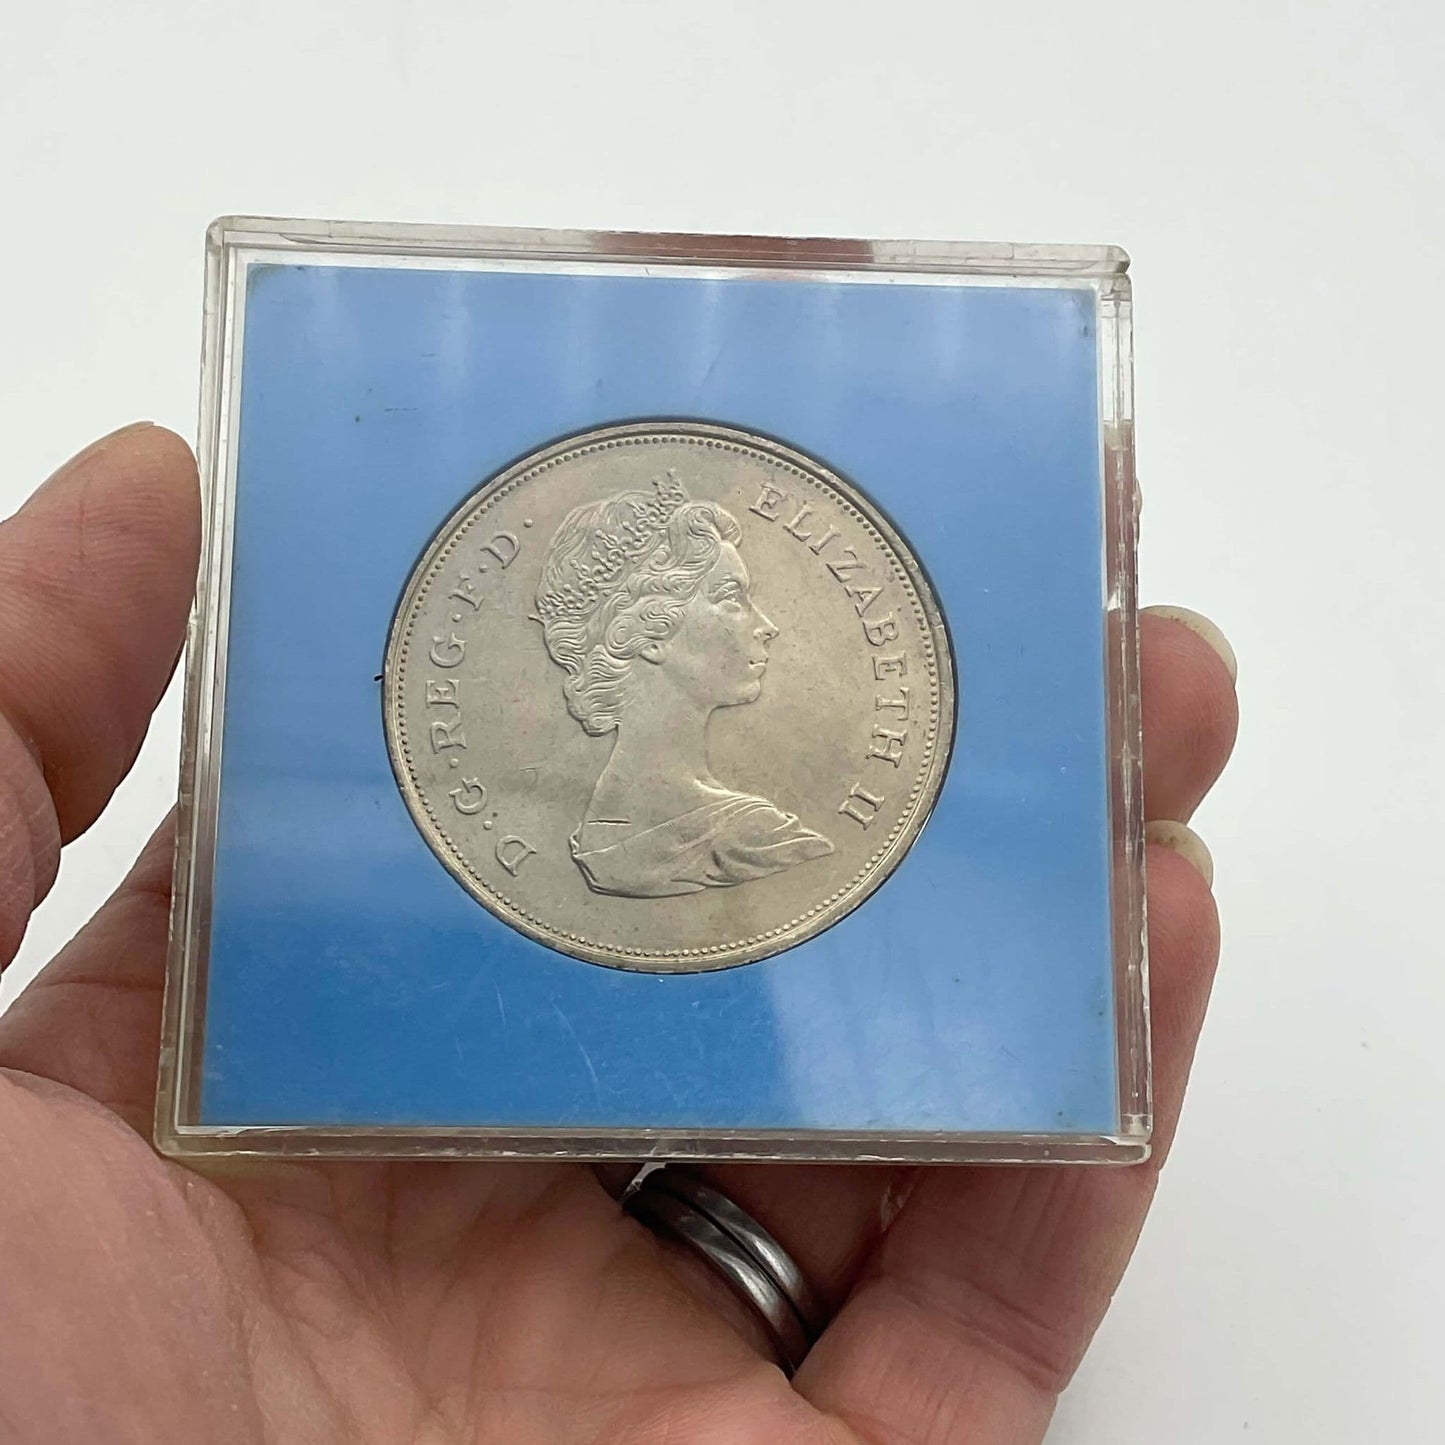 1980 Queen Mother 80th Birthday Commemorative Coin